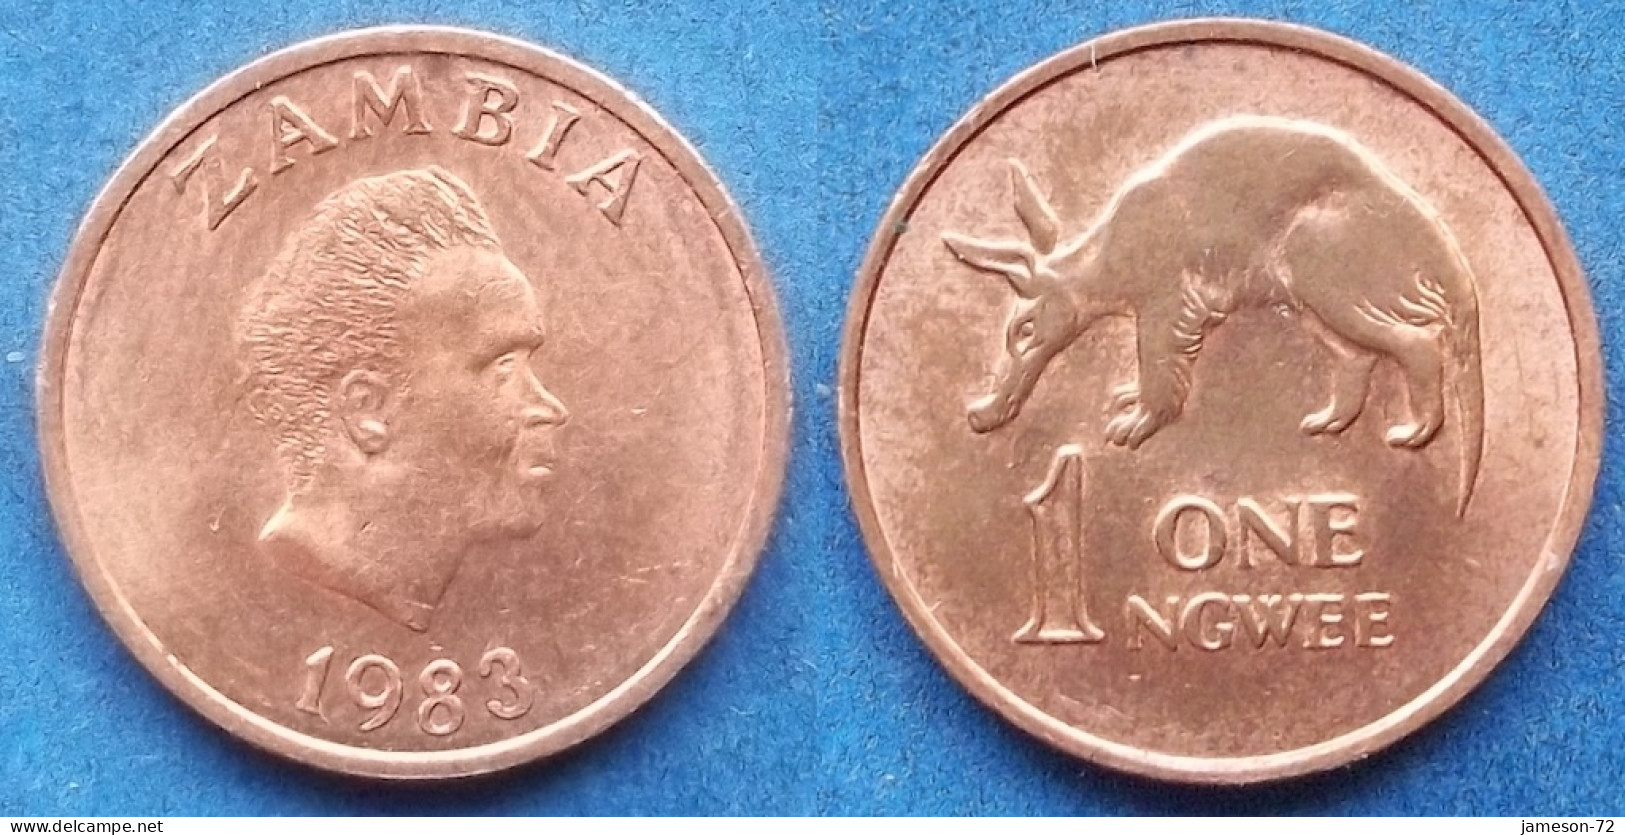 ZAMBIA - 1 Ngwee 1983 "Aardvark" KM# 9a Decimal Coinage (1968-2013) - Edelweiss Coins - Sambia